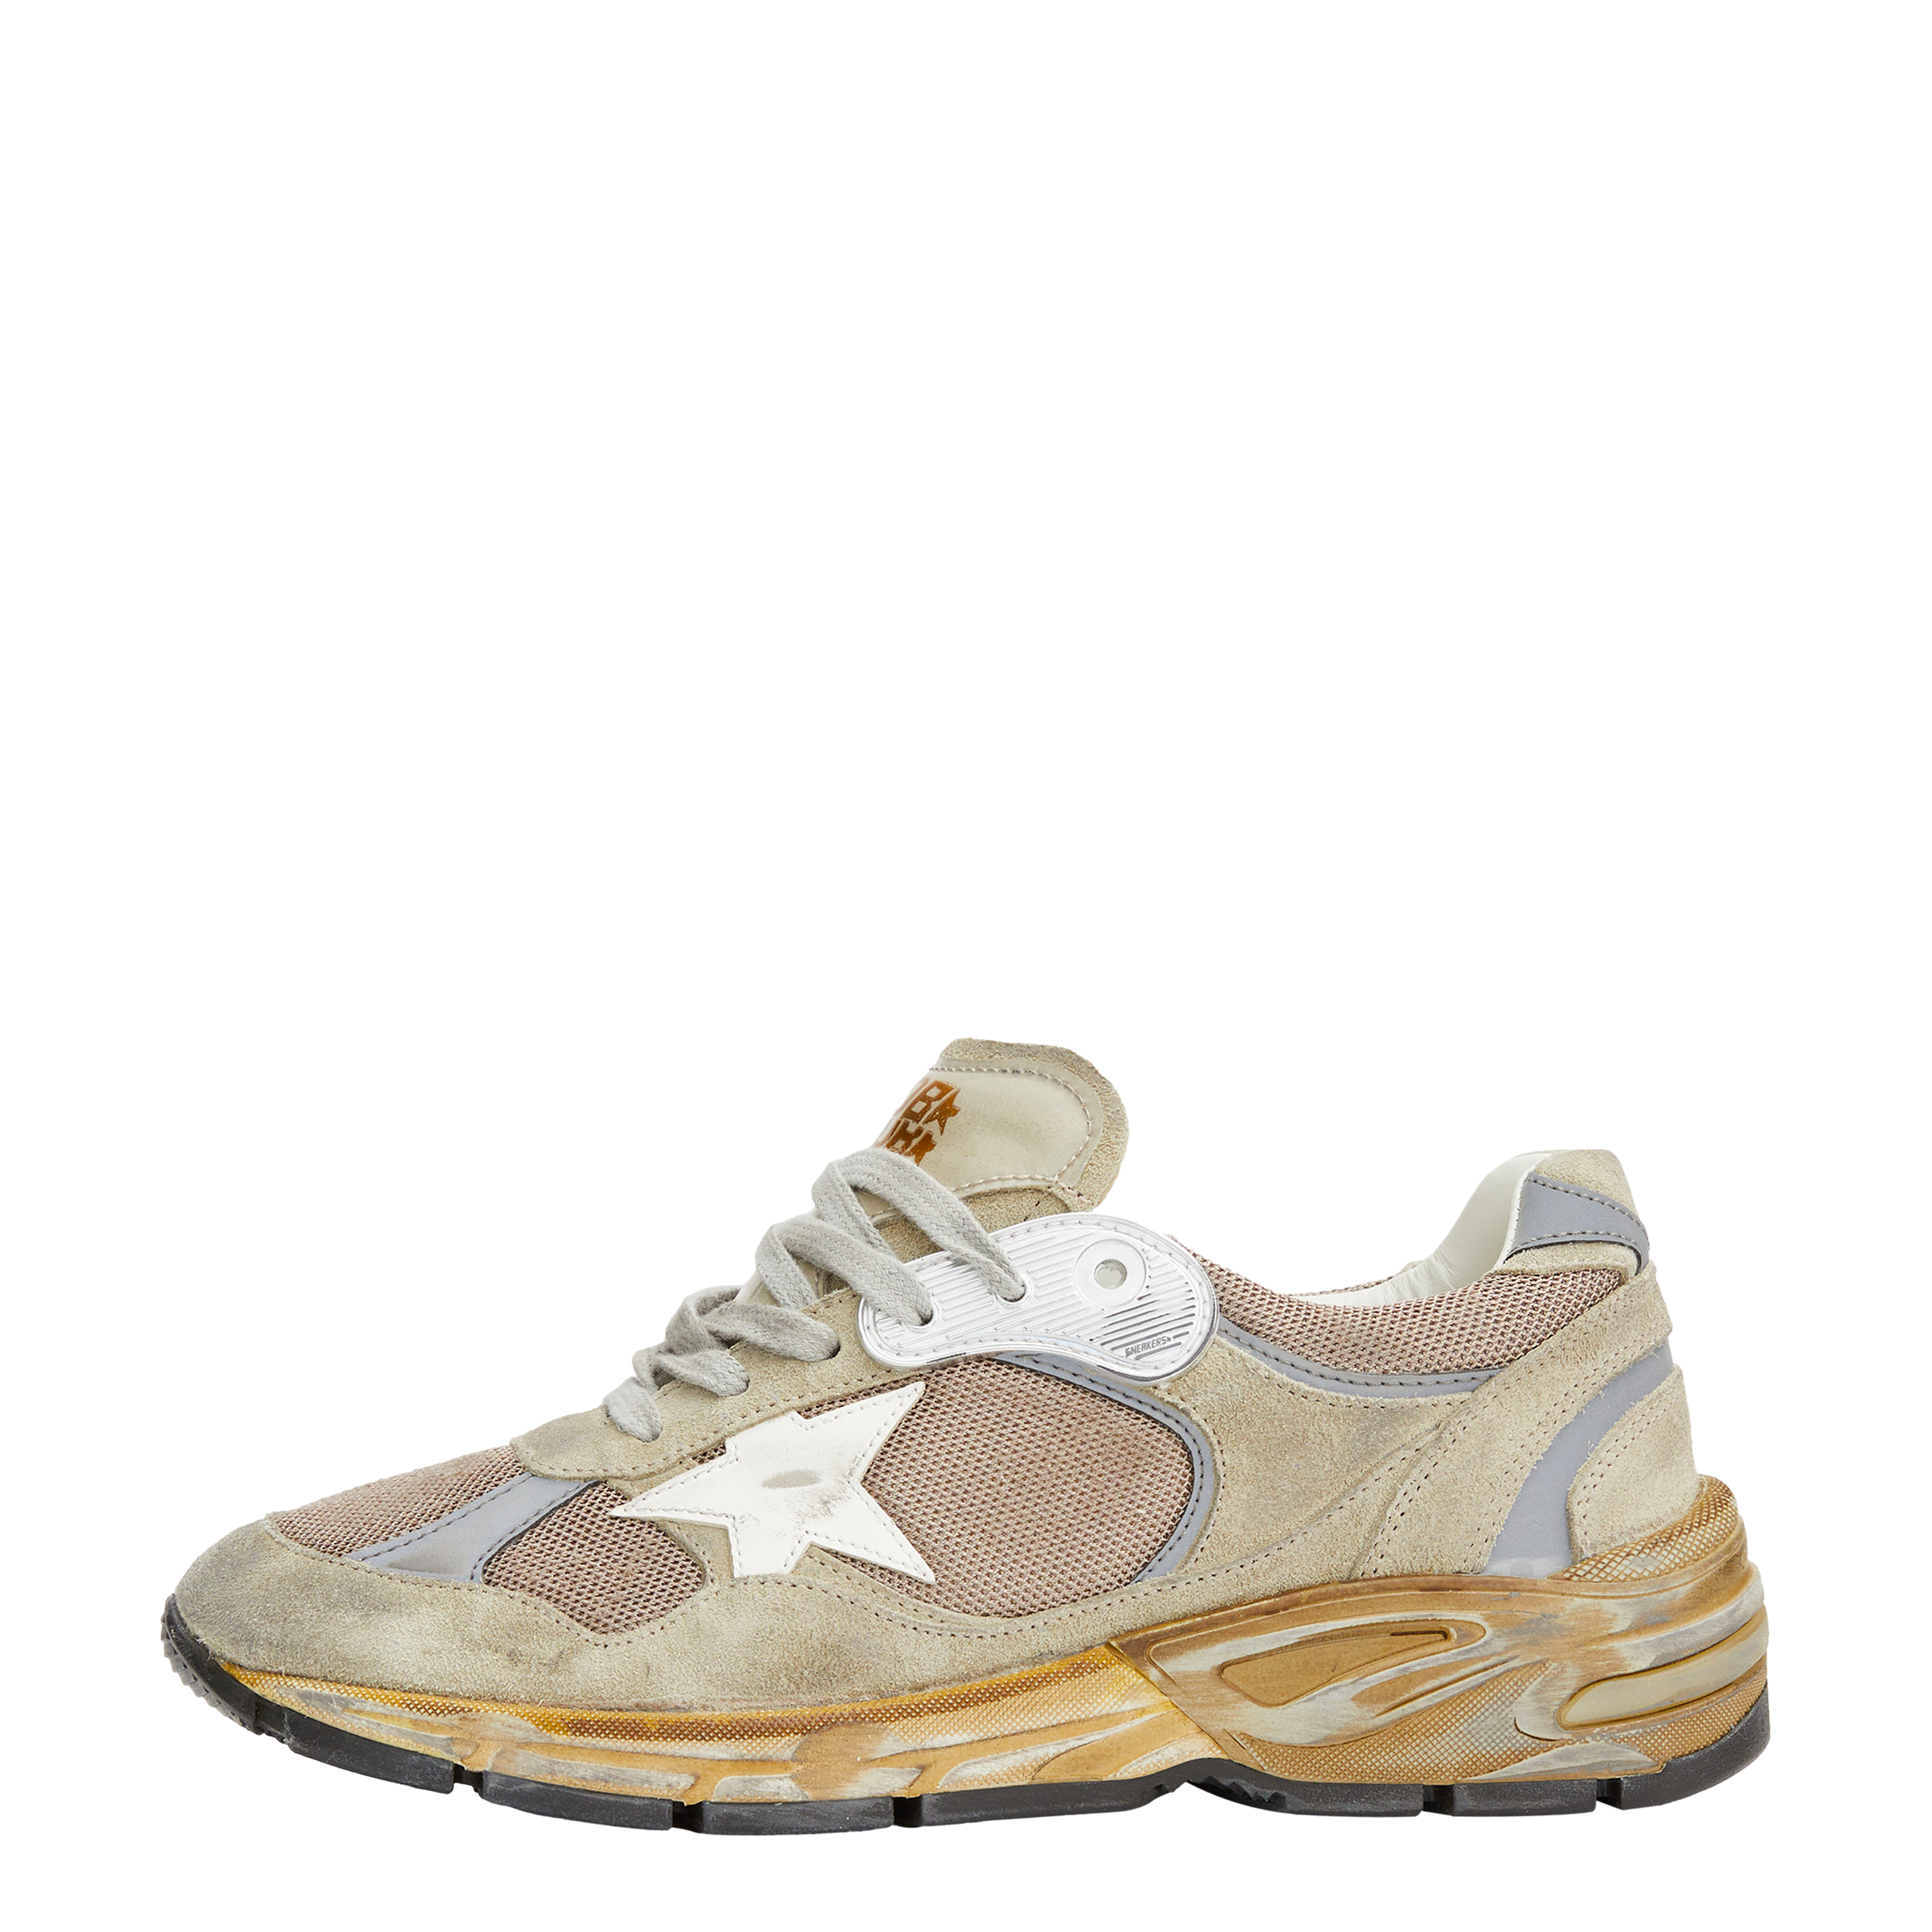 None Golden Goose Deluxe Brand GMF00199/F003271/81751, размер 40;41;42;43;44;45;46 GMF00199/F003271/81751 - фото 3